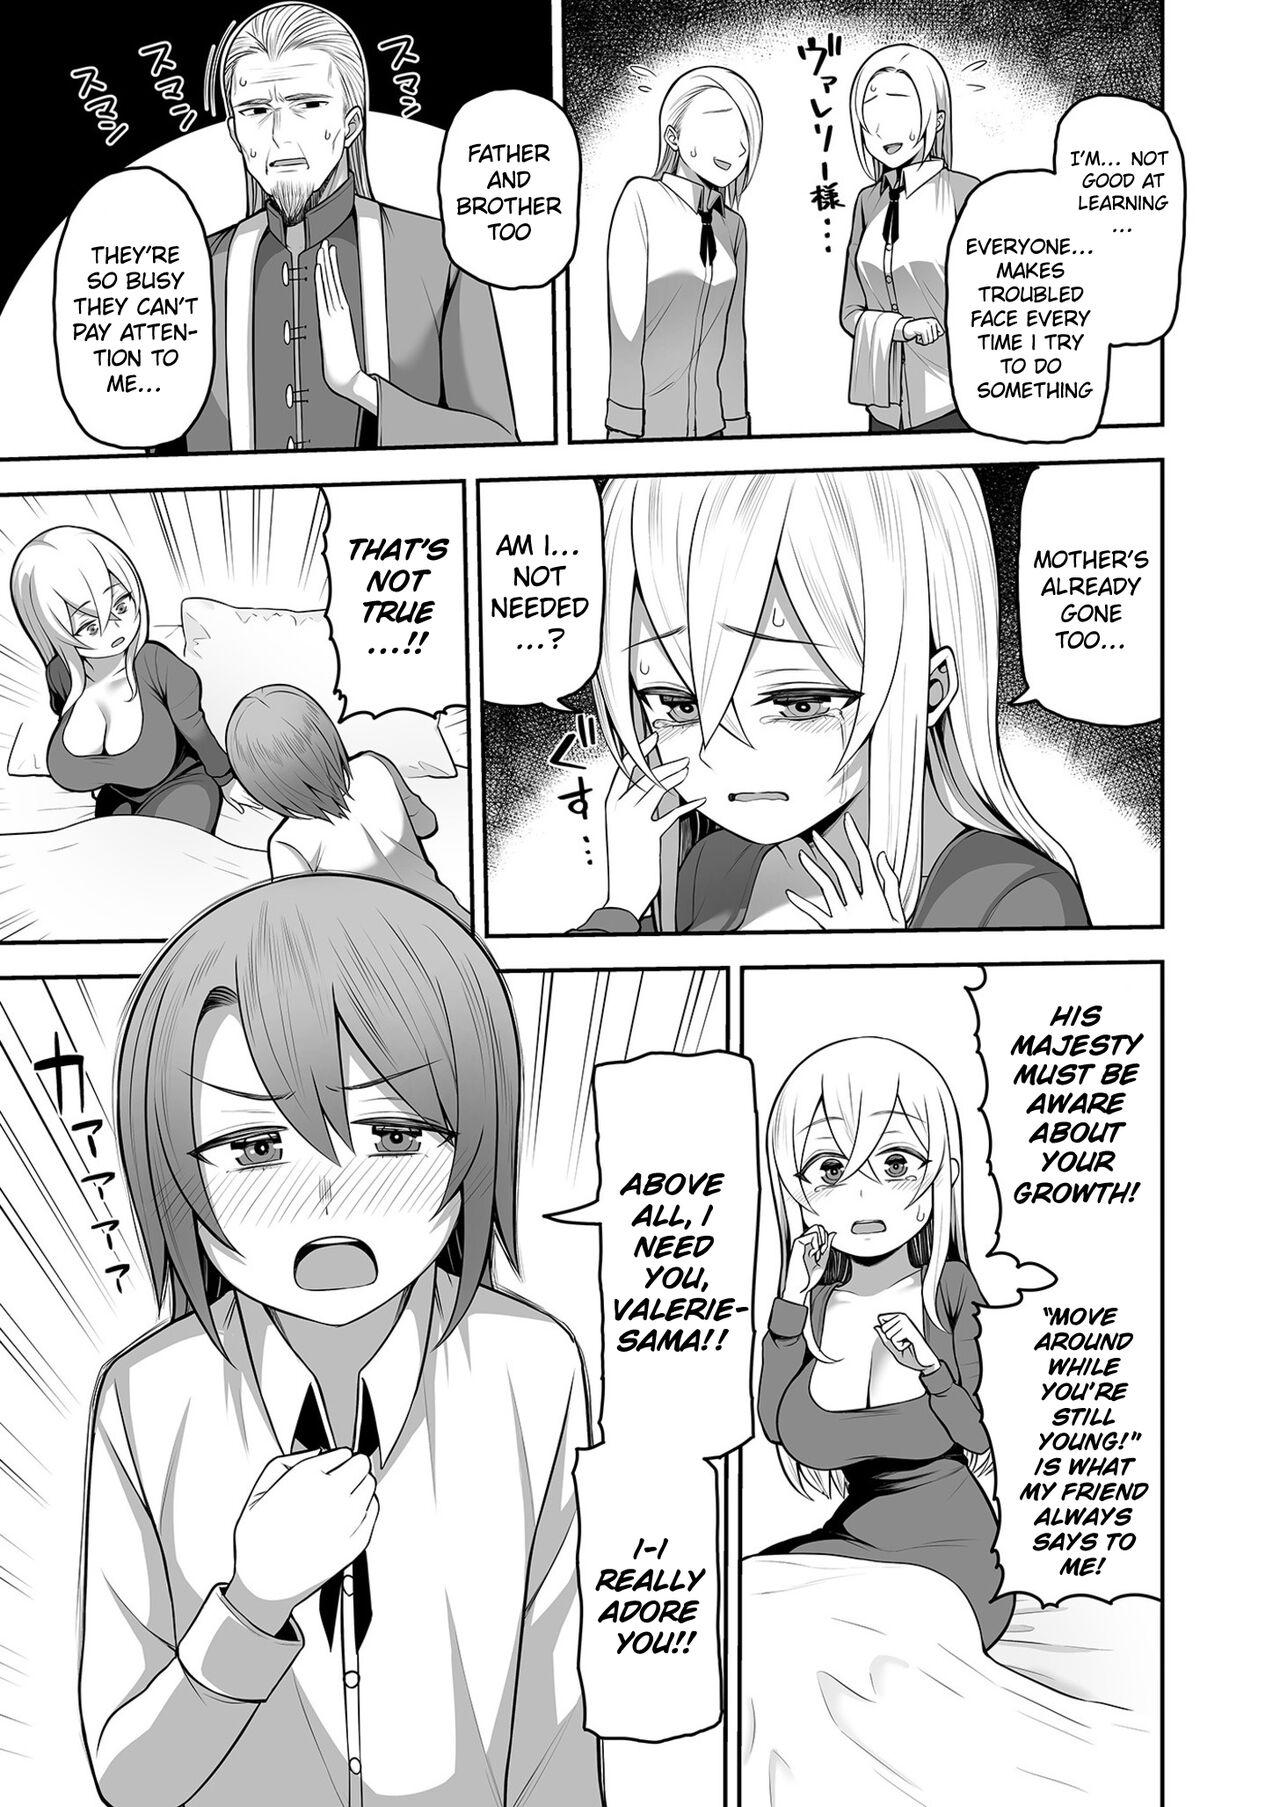 Gay Orgy [Kayumidome] Valerie Monogatari ~Oujo-sama wa Yaritai Houdai!?~ Ch1/ The Story of Valerie ~The Queen Gets To Fuck As Much As She Wants!~ Ch.1 [English] {Doujins.com} Stepsister - Page 9